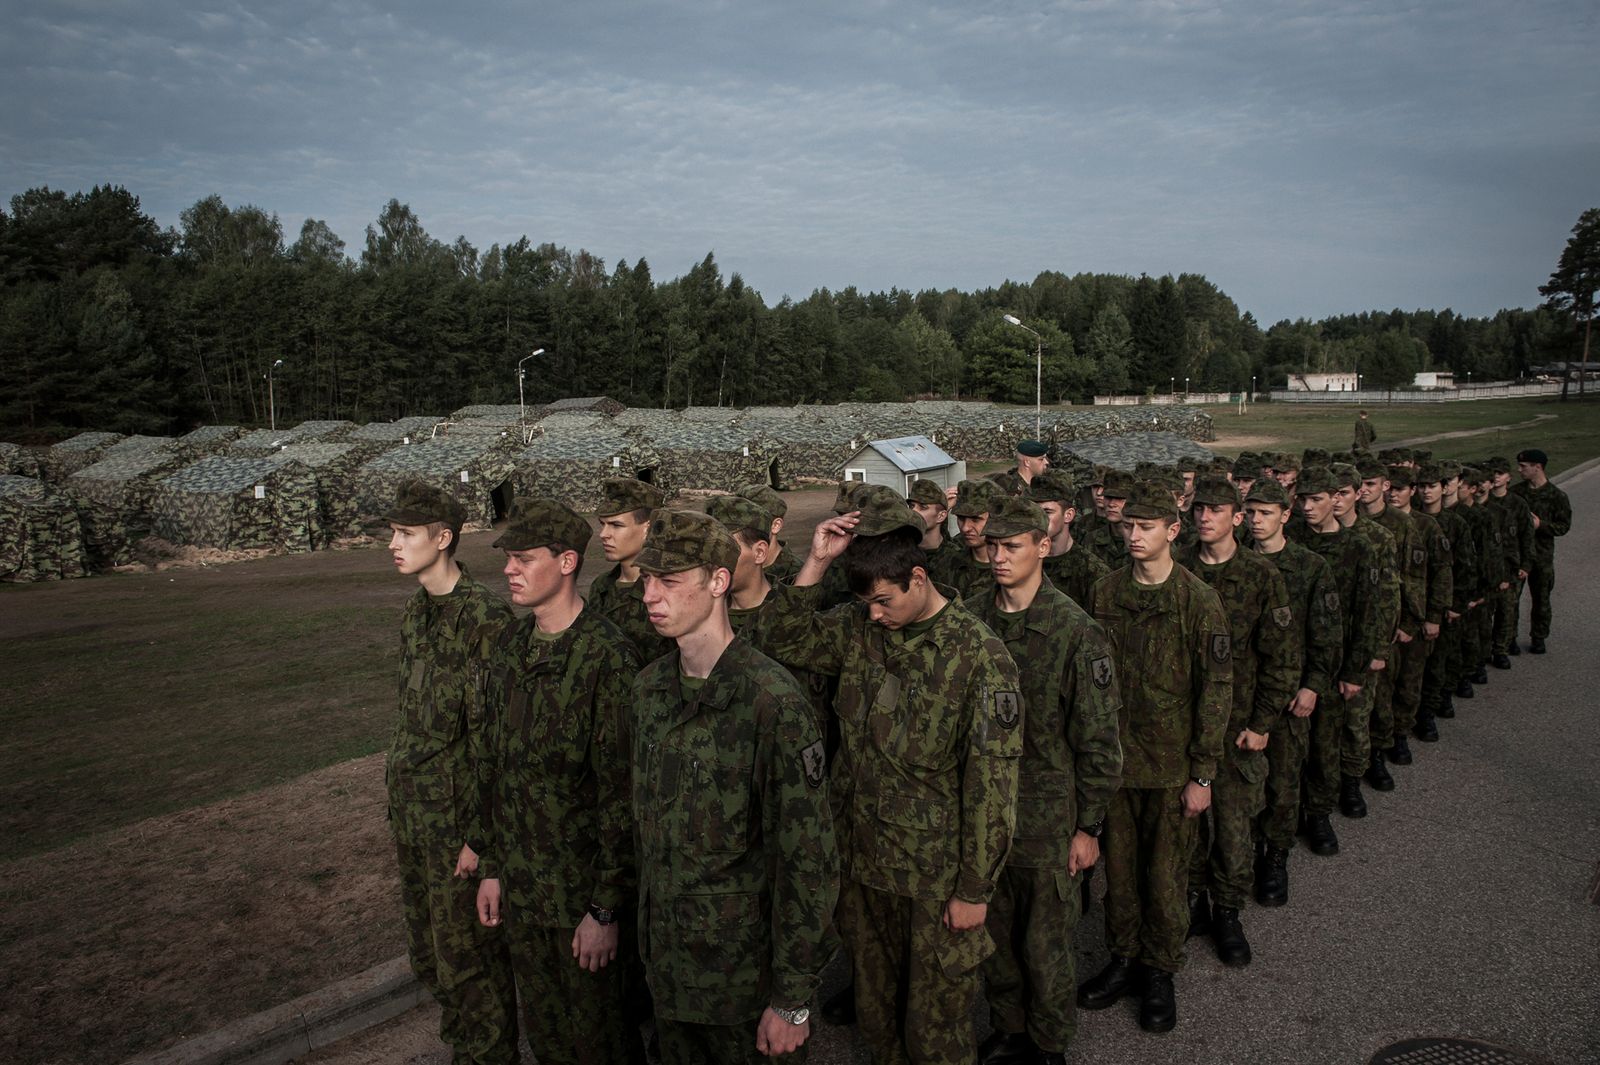 © Mattia Vacca - Young cadets get ready to march at dawn, inside the military camp in Rukla.